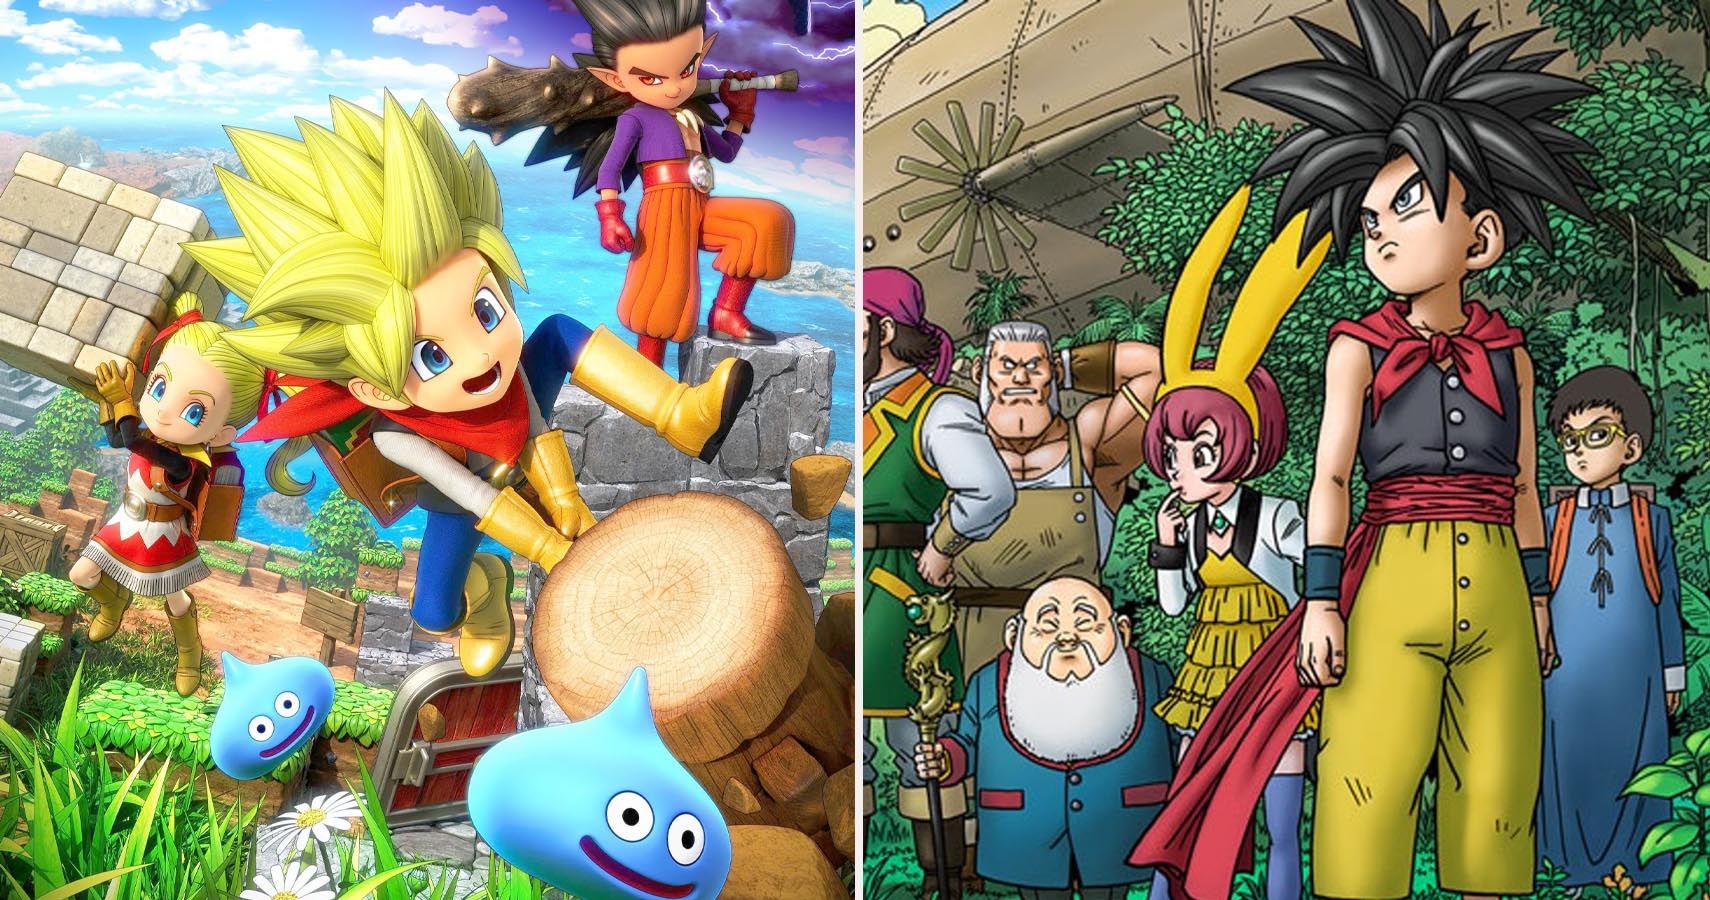 10 fun facts about DRAGON QUEST